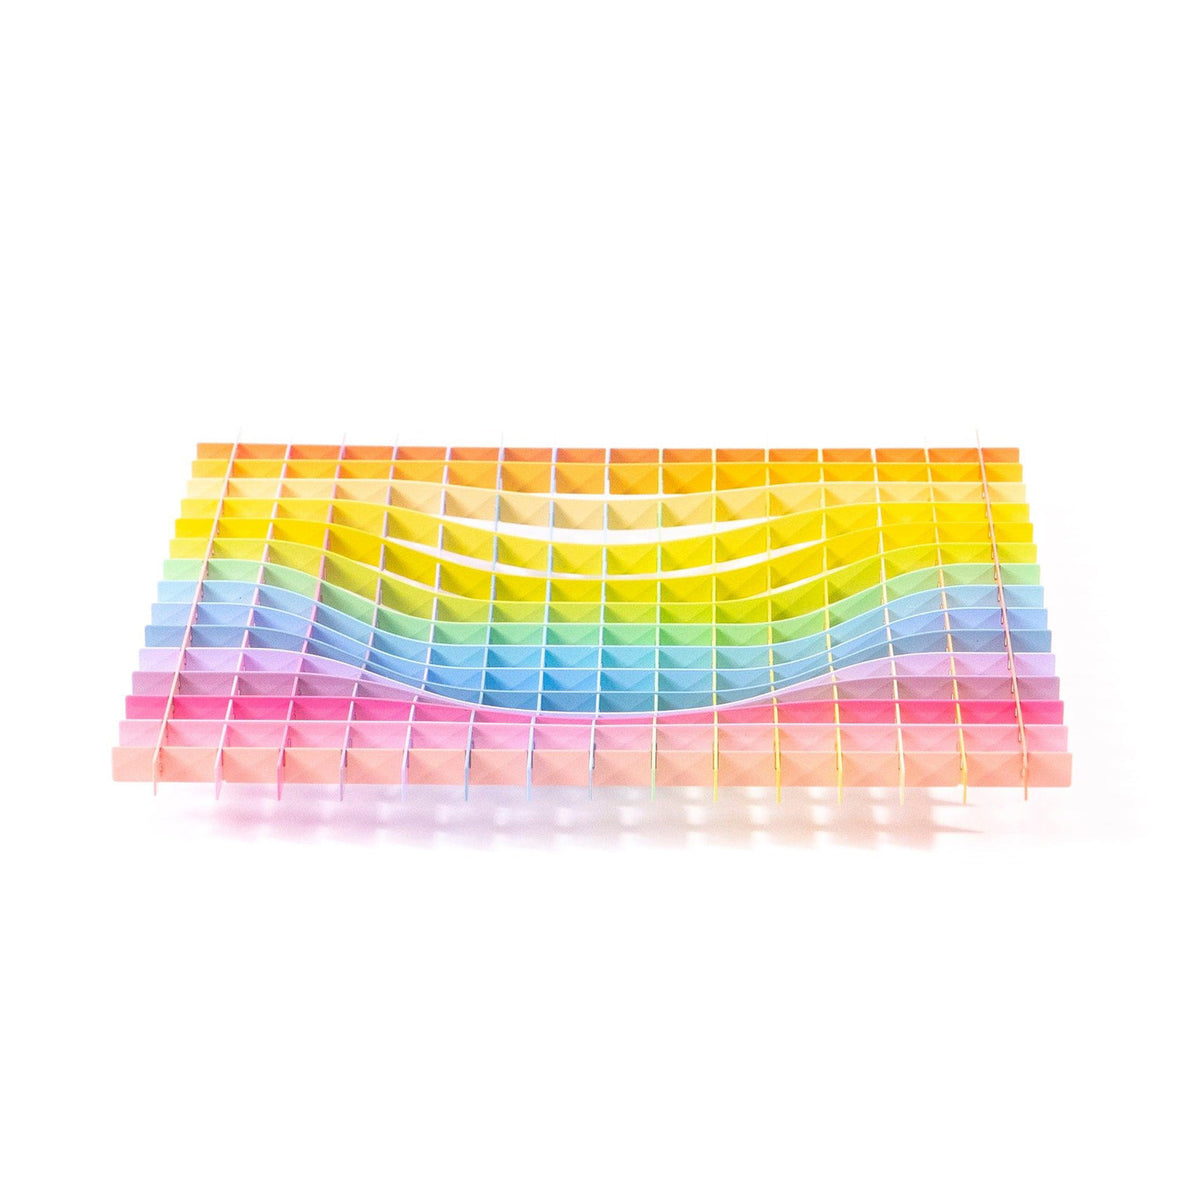 Straight view of a Spectrum Tray.